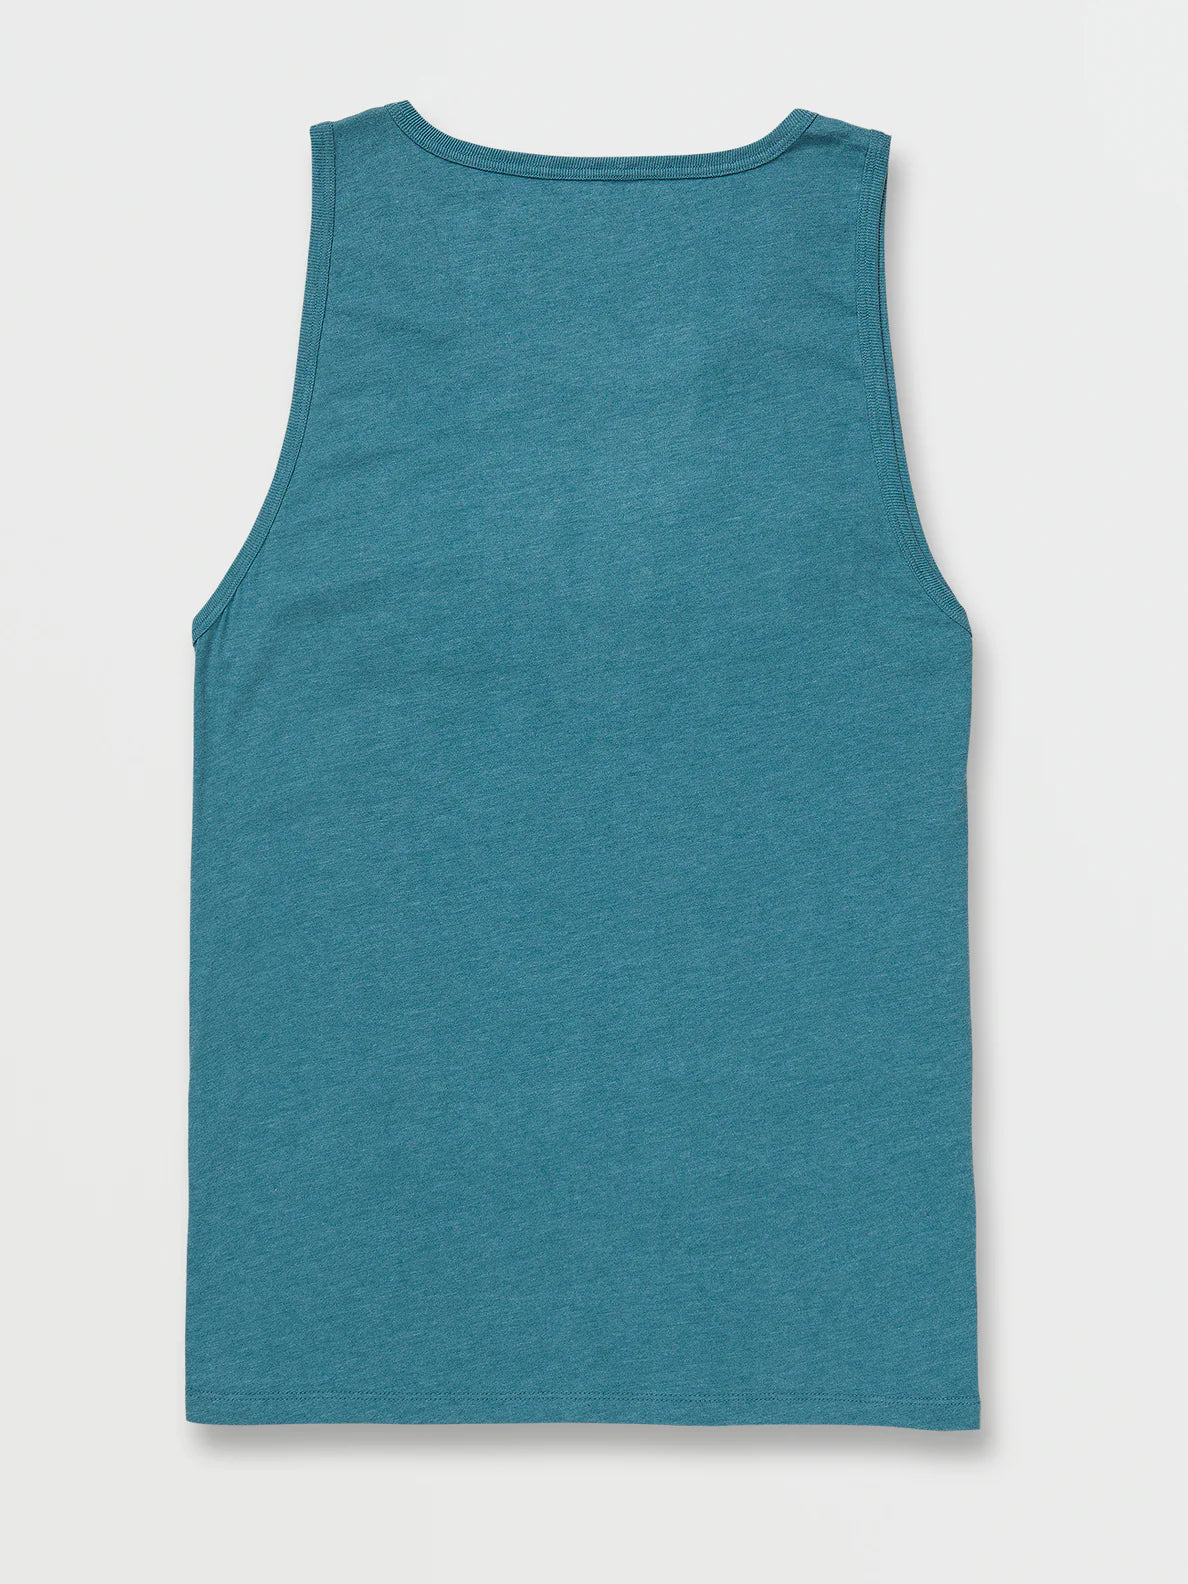 Solid Heather Tank